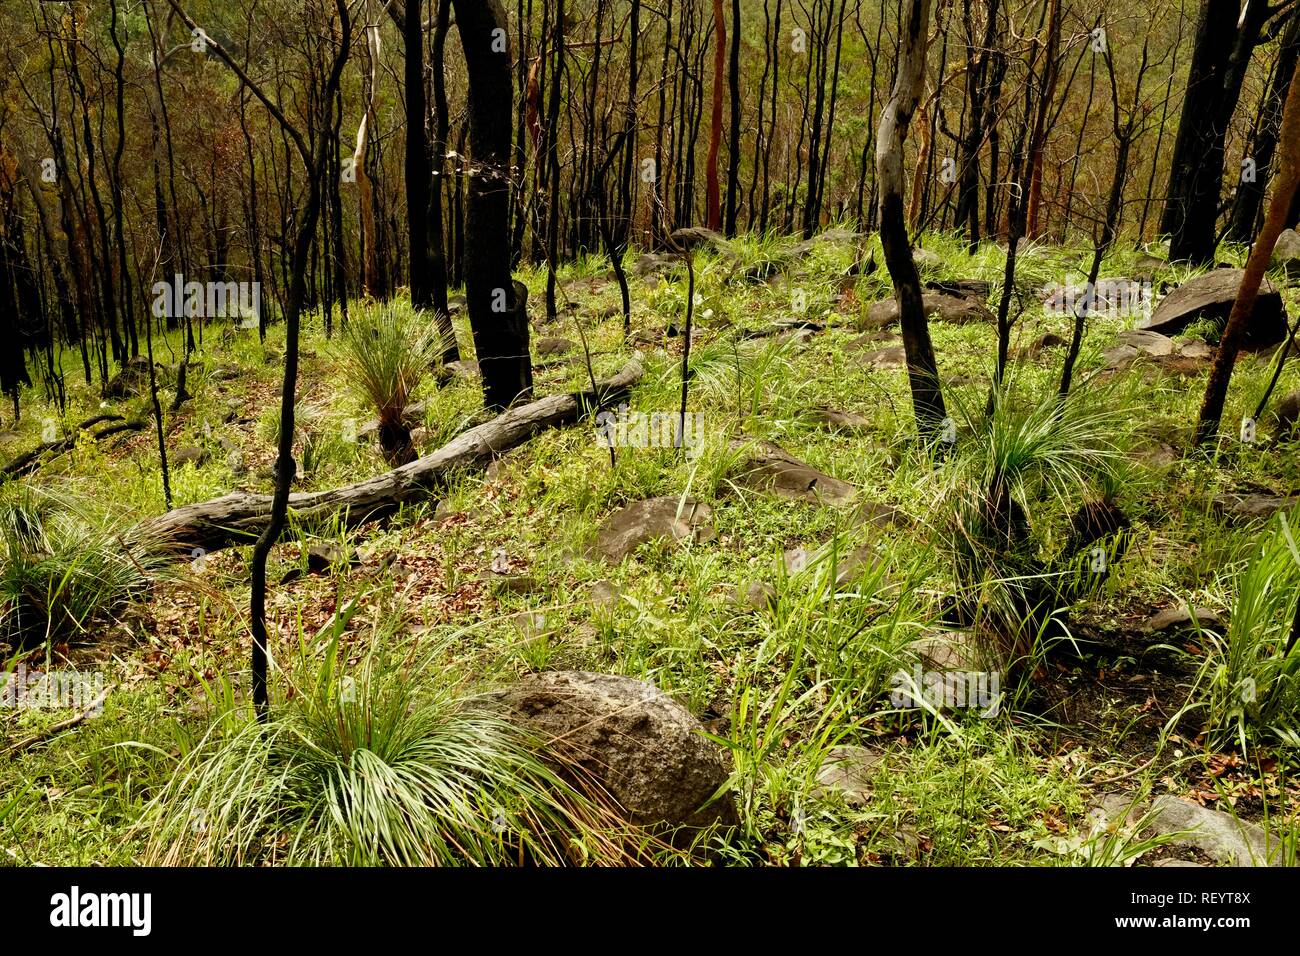 Regrowth of a eucalyptus forest after a fire, Mia Mia State Forest, Queensland, Australia Stock Photo